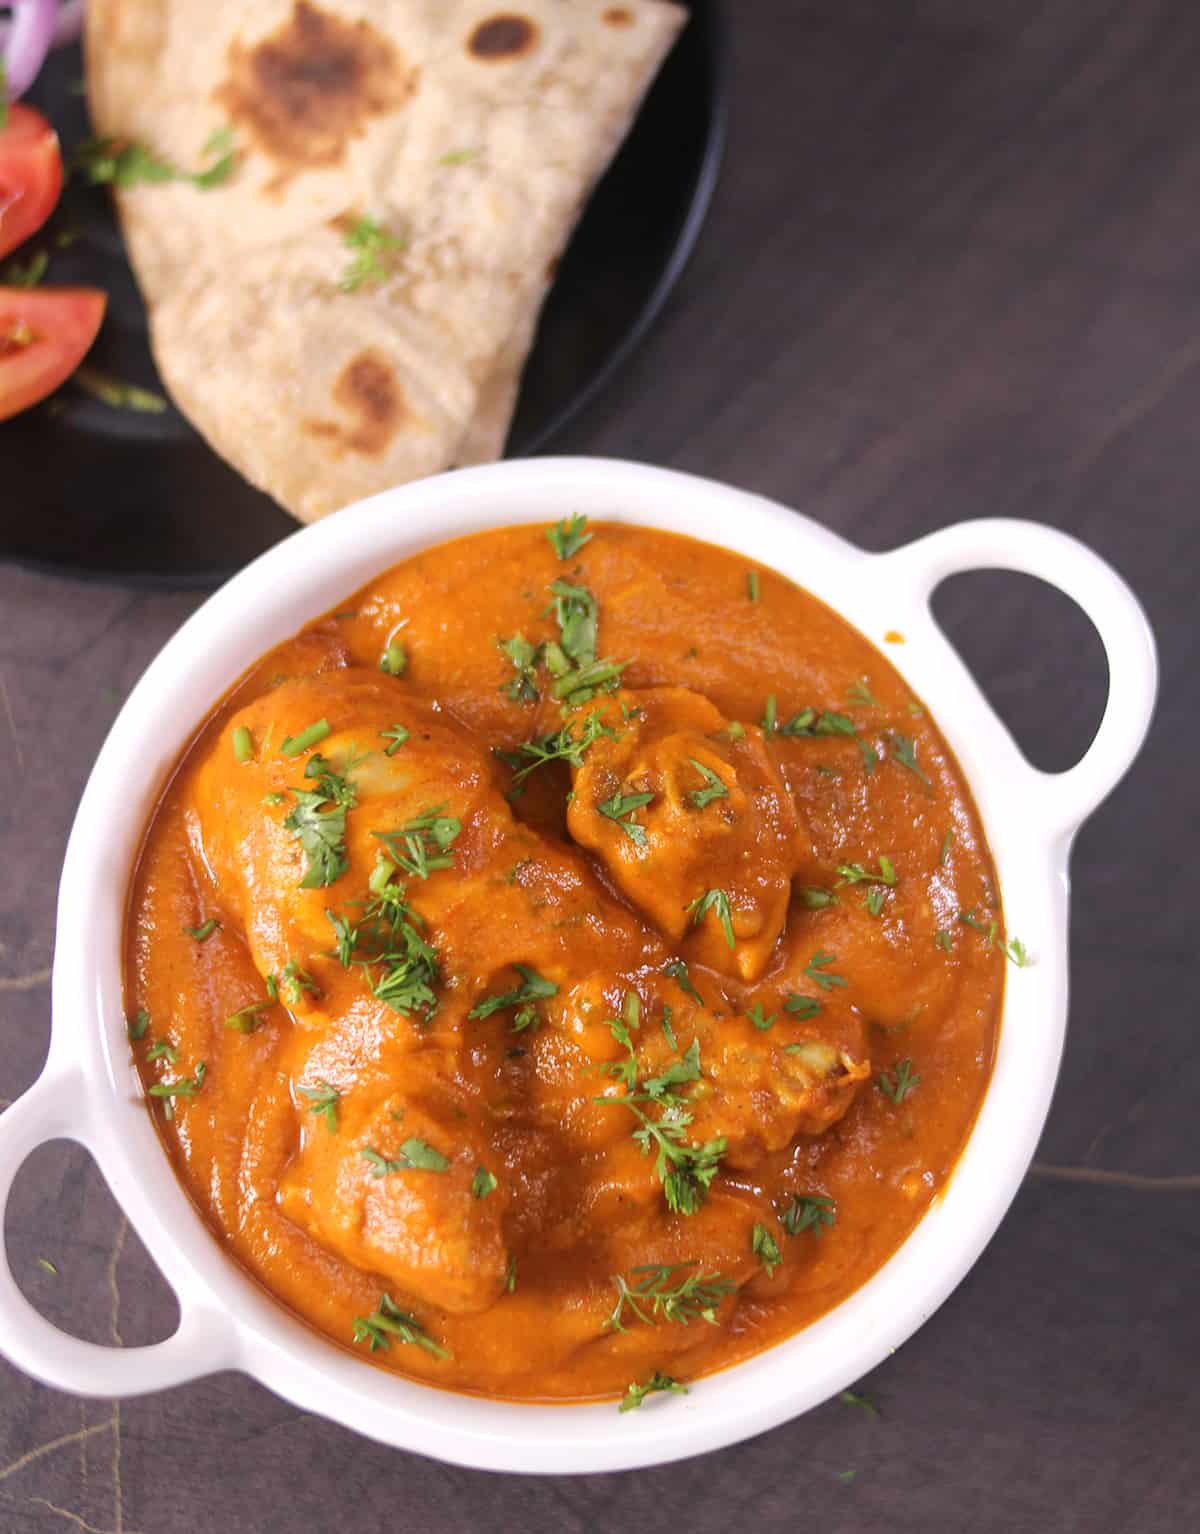 Bowl of spicy chicken handi served with chapati (roti).